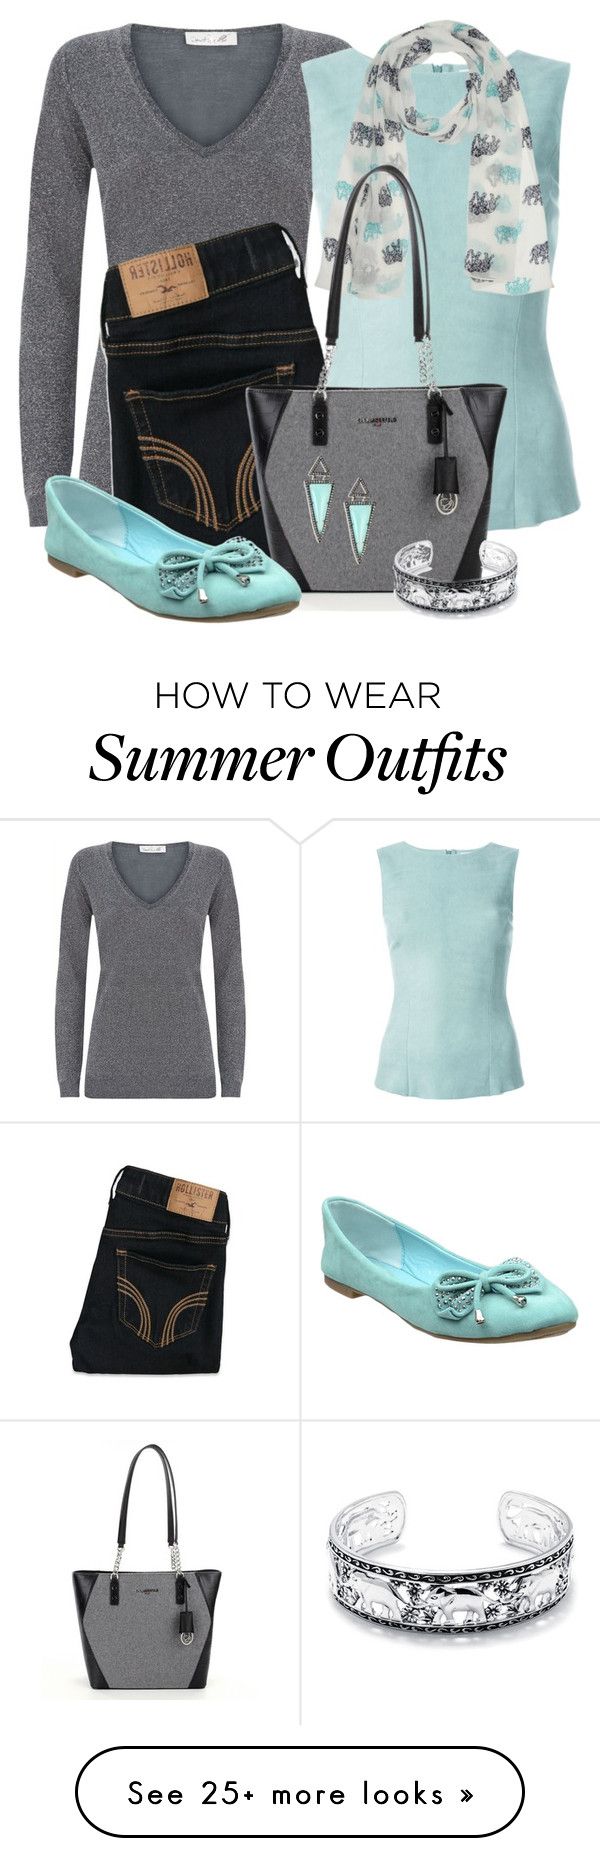 "Mint & Gray" by jennifernoriega on Polyvore featuring Damsel in a...